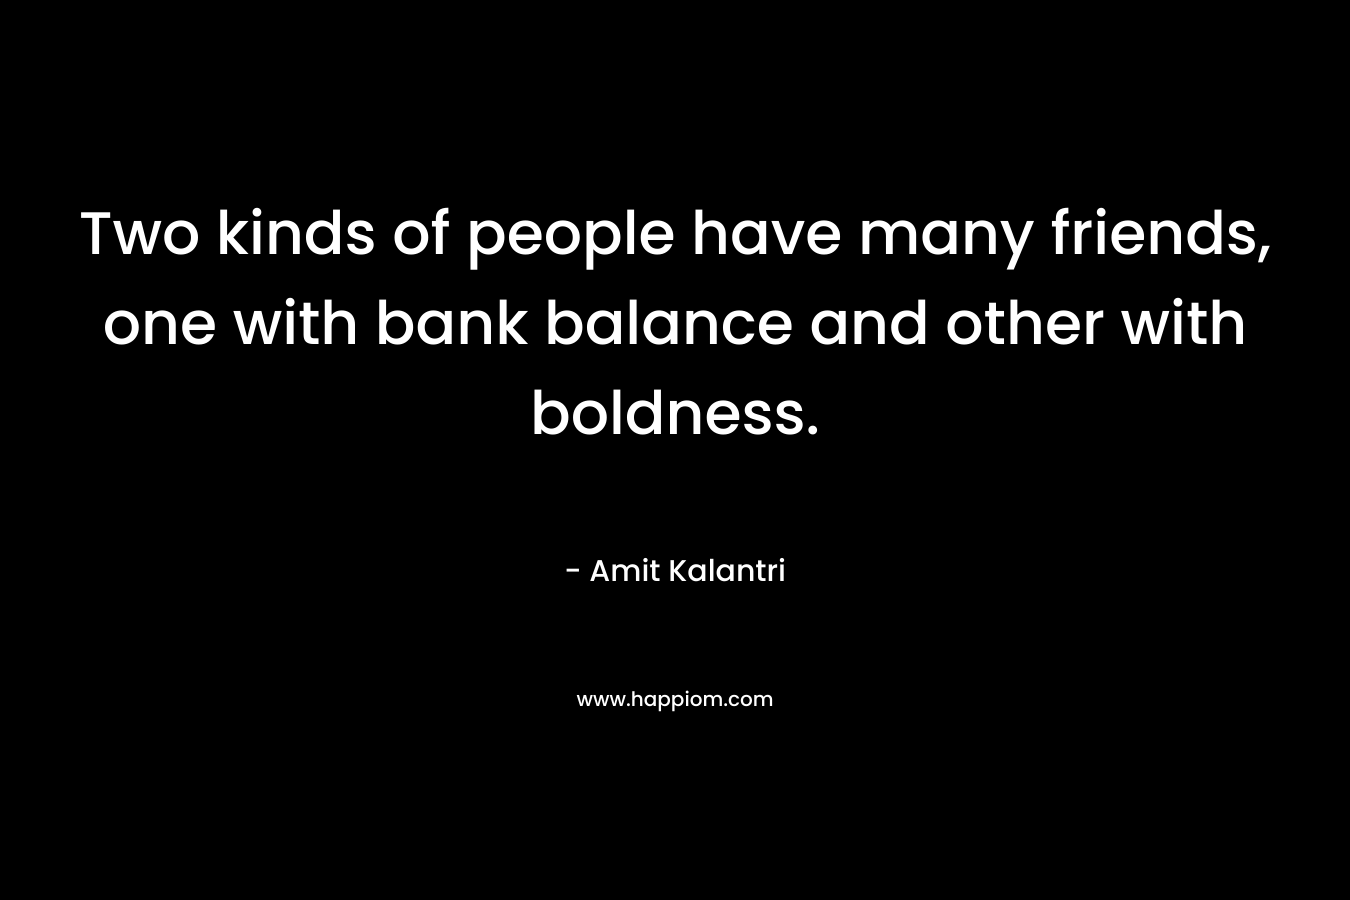 Two kinds of people have many friends, one with bank balance and other with boldness.